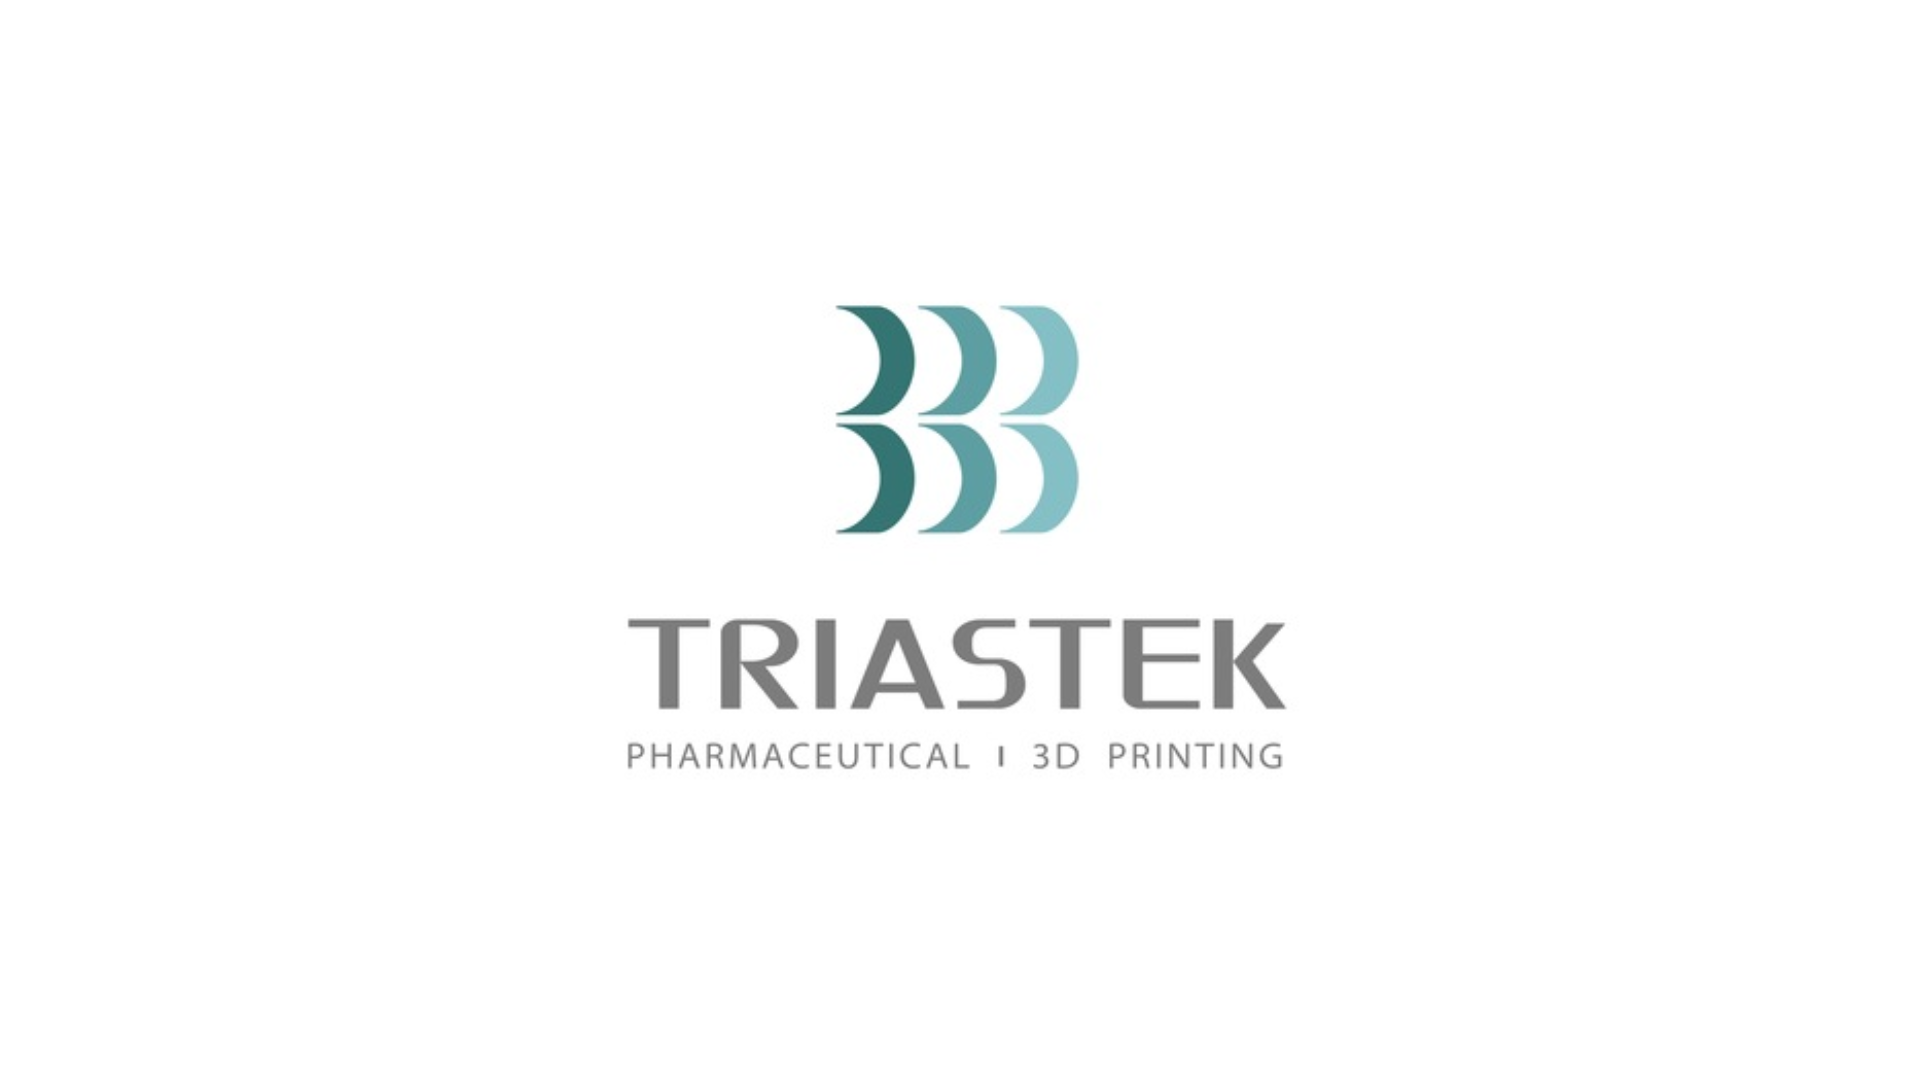 Triastek announced collaboration with Eli Lilly to use 3D printing to precisely target and program release of drugs in specific regions of the GI tract.